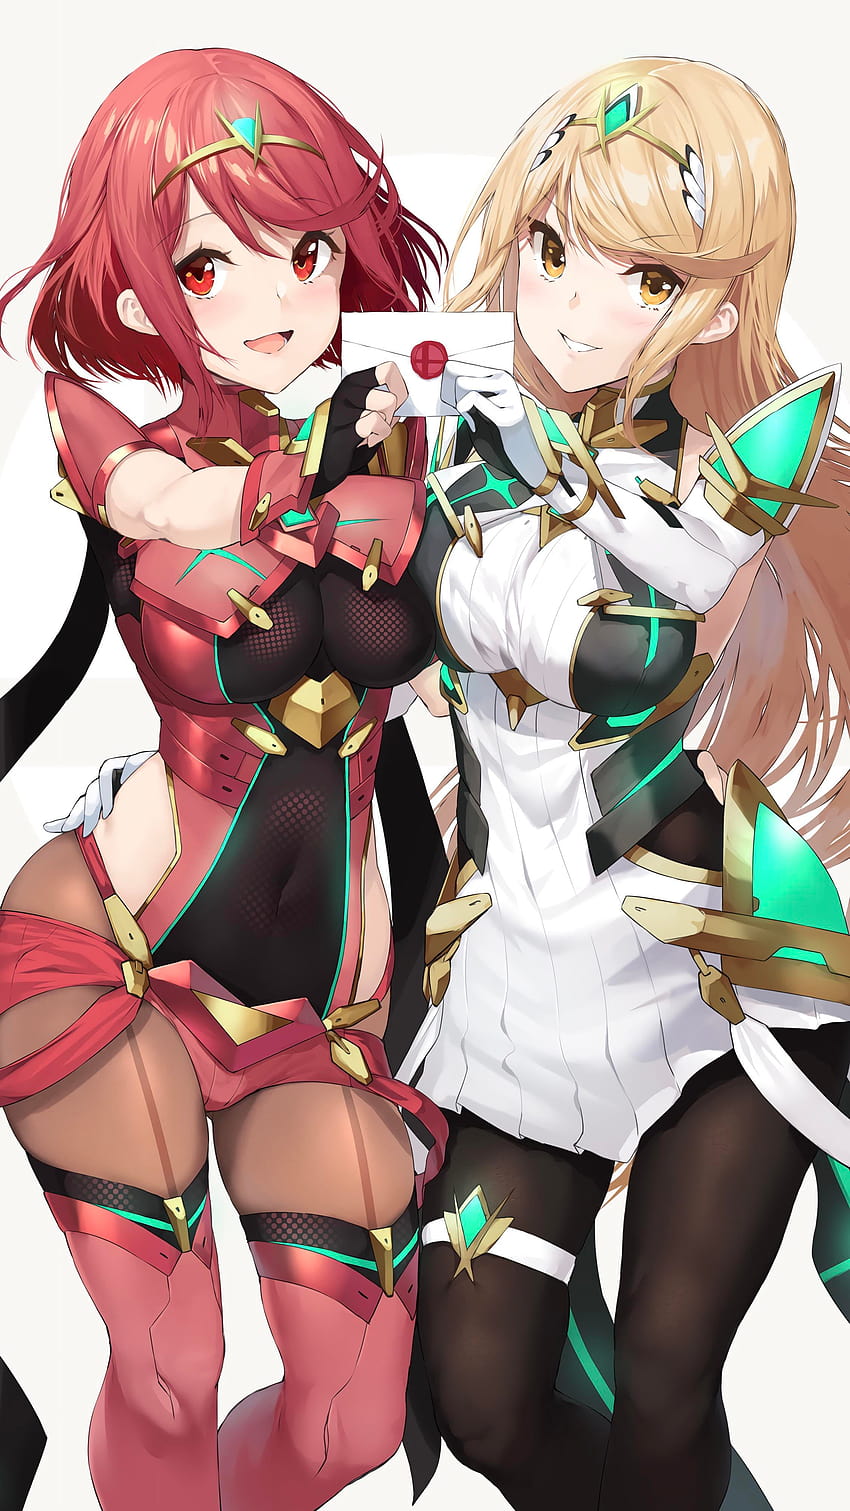 Half Enlightened One on Twitter Did a simple wallpaper for Pyra  XenobladeChronicles2 Got a better res and a dark version following this  friendly link 3c httpstcoaOjLSiH6aJ httpstcoz1B0yPF2om  Twitter